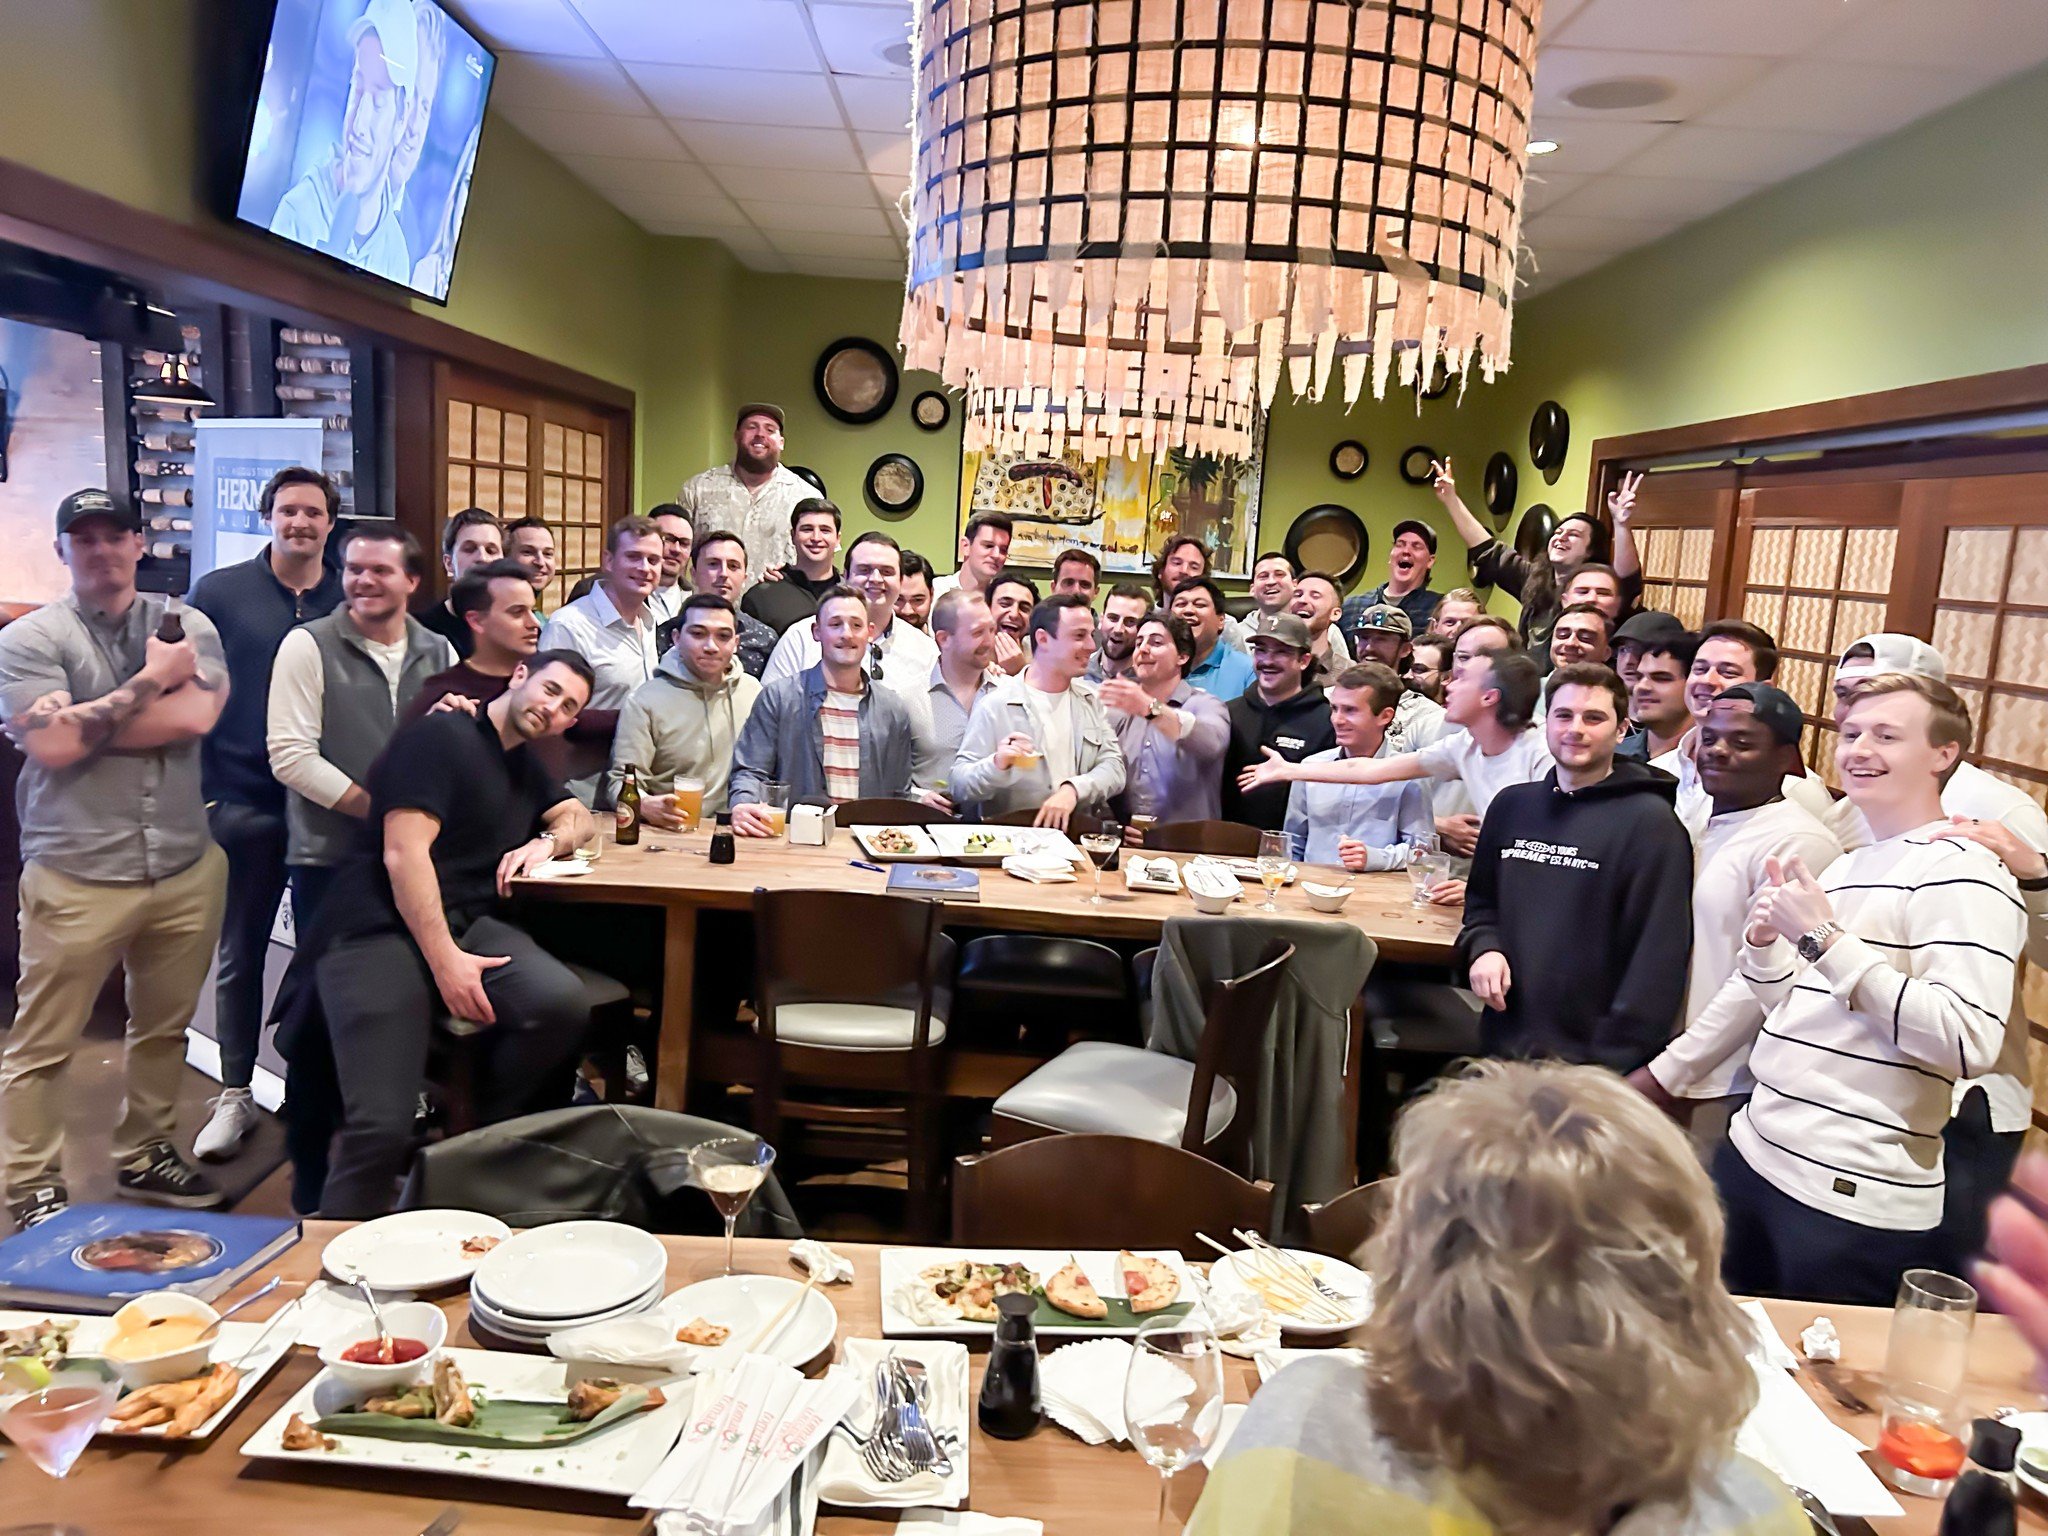 The Class of 2014 showed out for their 10-year reunion!

Thank you to the 2014 Reunion Committee as well as Cameron Rone '14 and @tomatoesmargate for hosting the most well-attended alumni reunion in recent memory.  Once a Hermit, always a Hermit!

#H